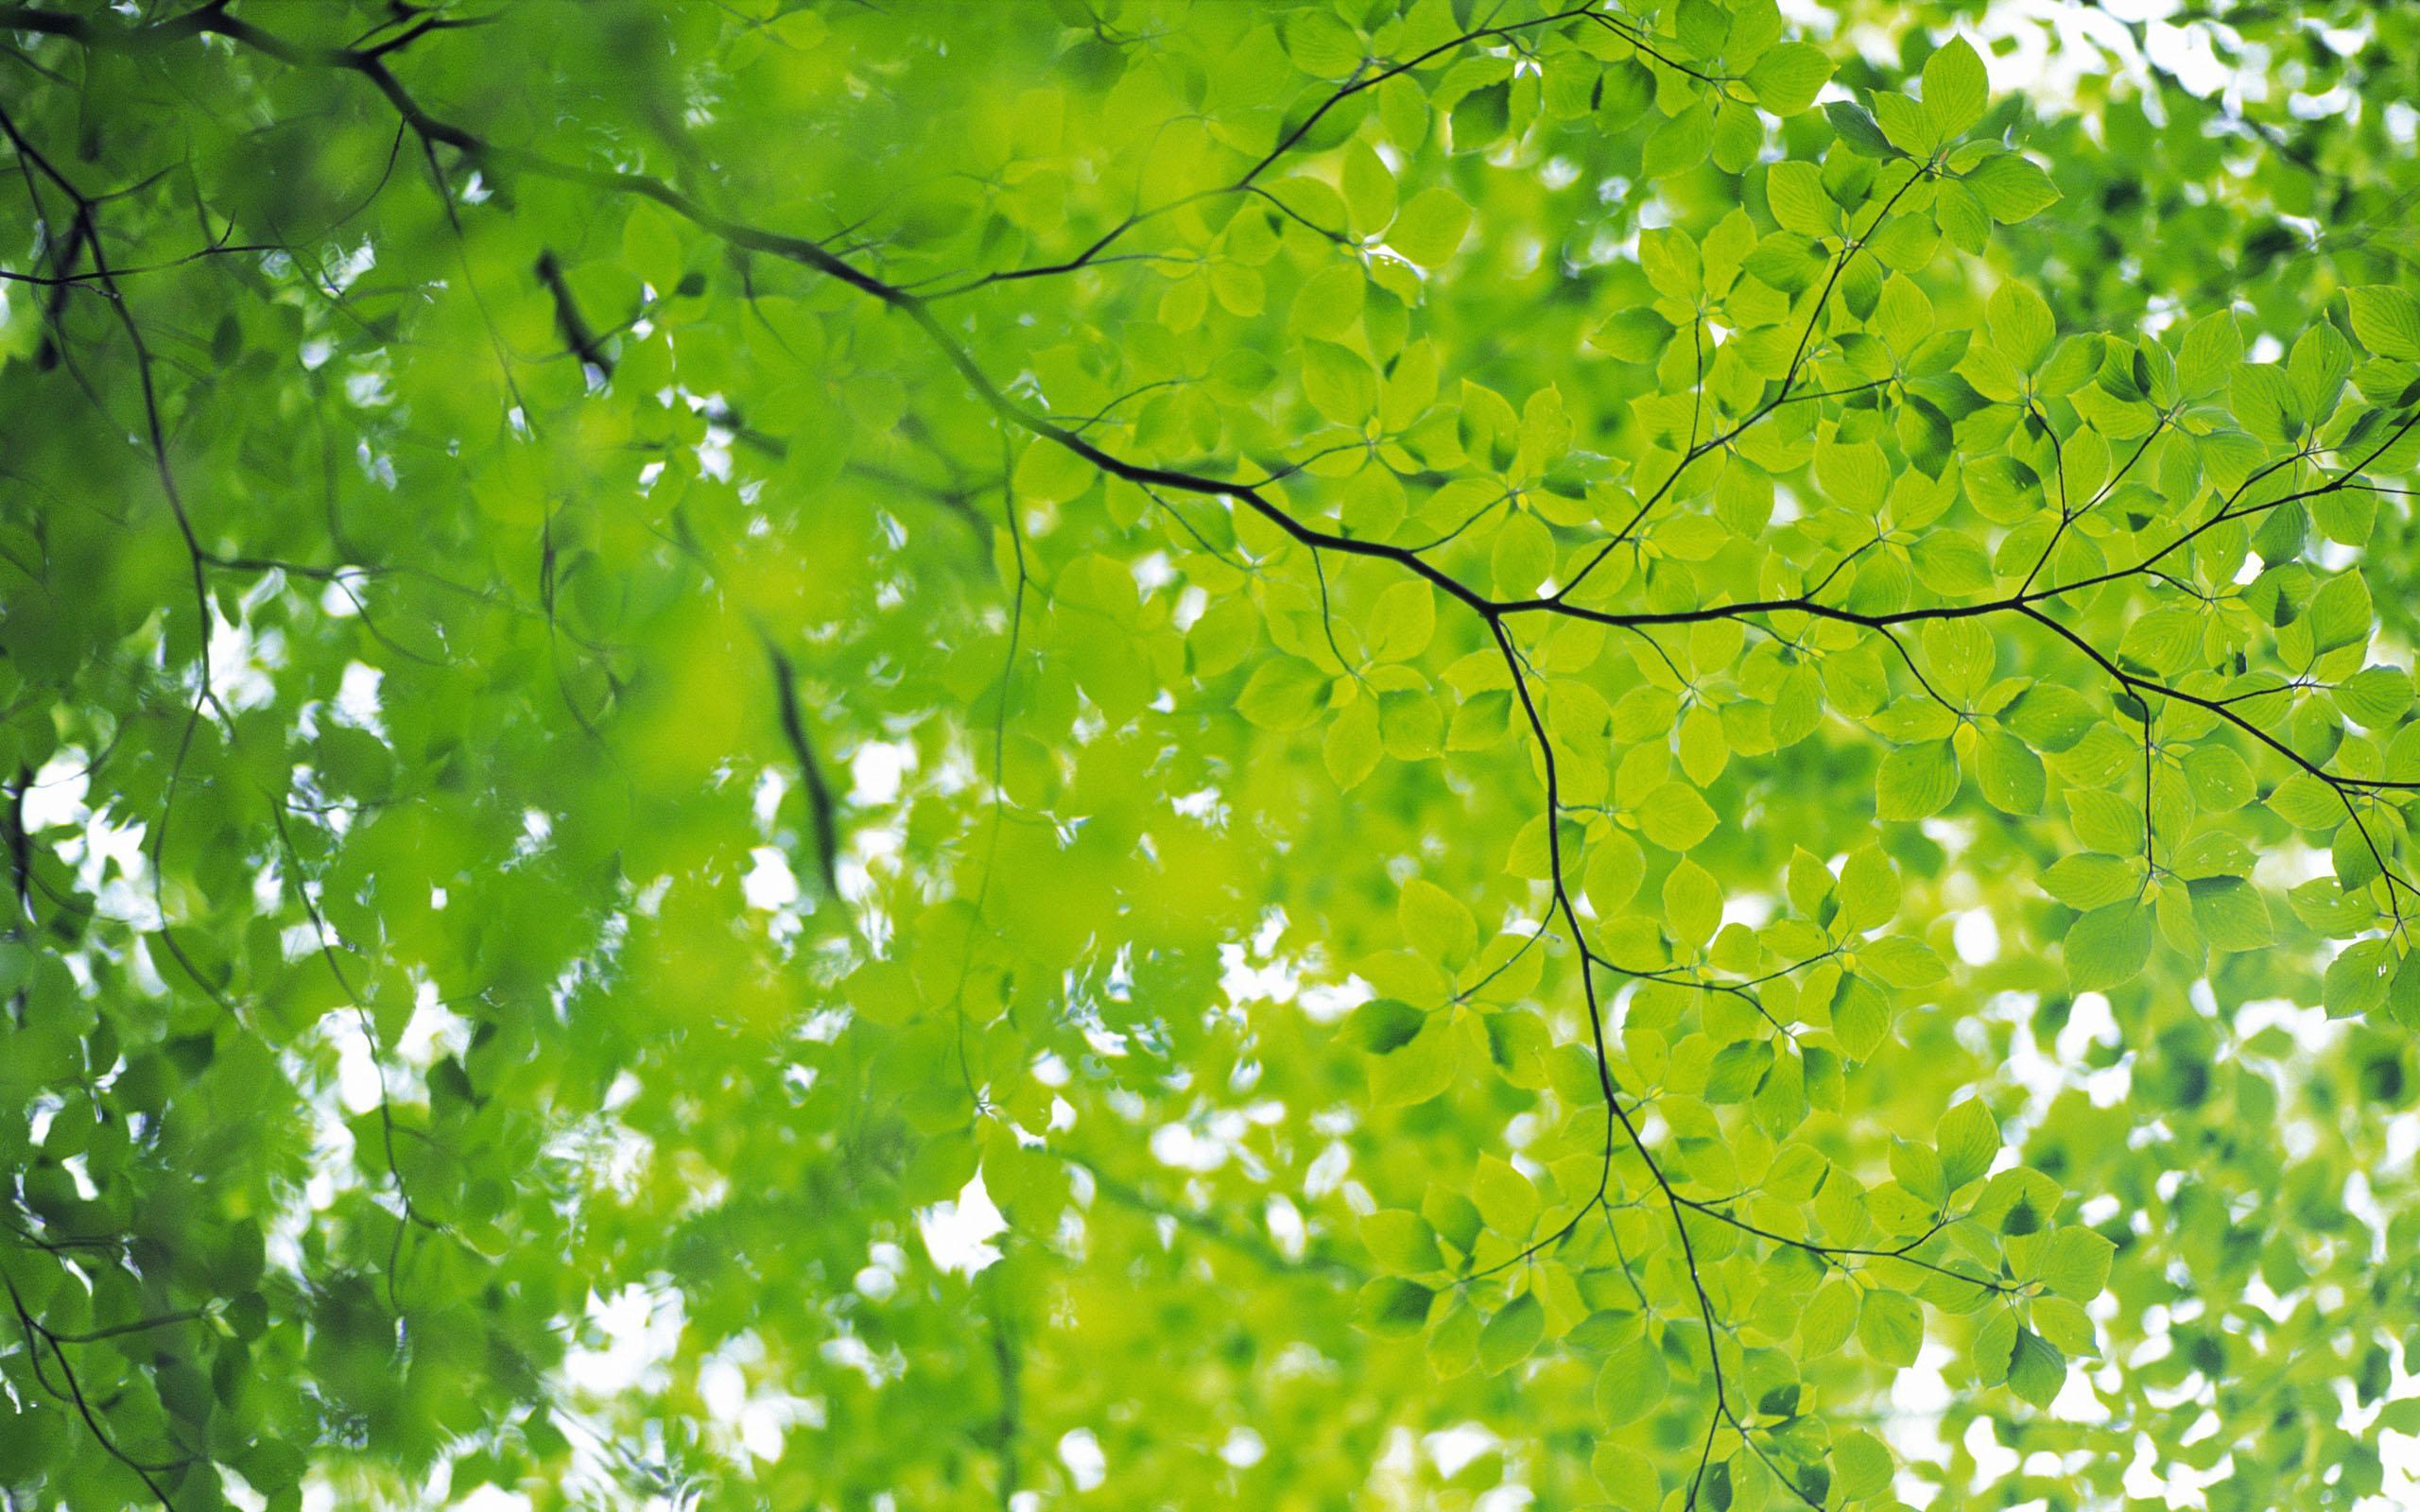 Wallpaper Of Photo Collection Green Nature HD Image High Resolution